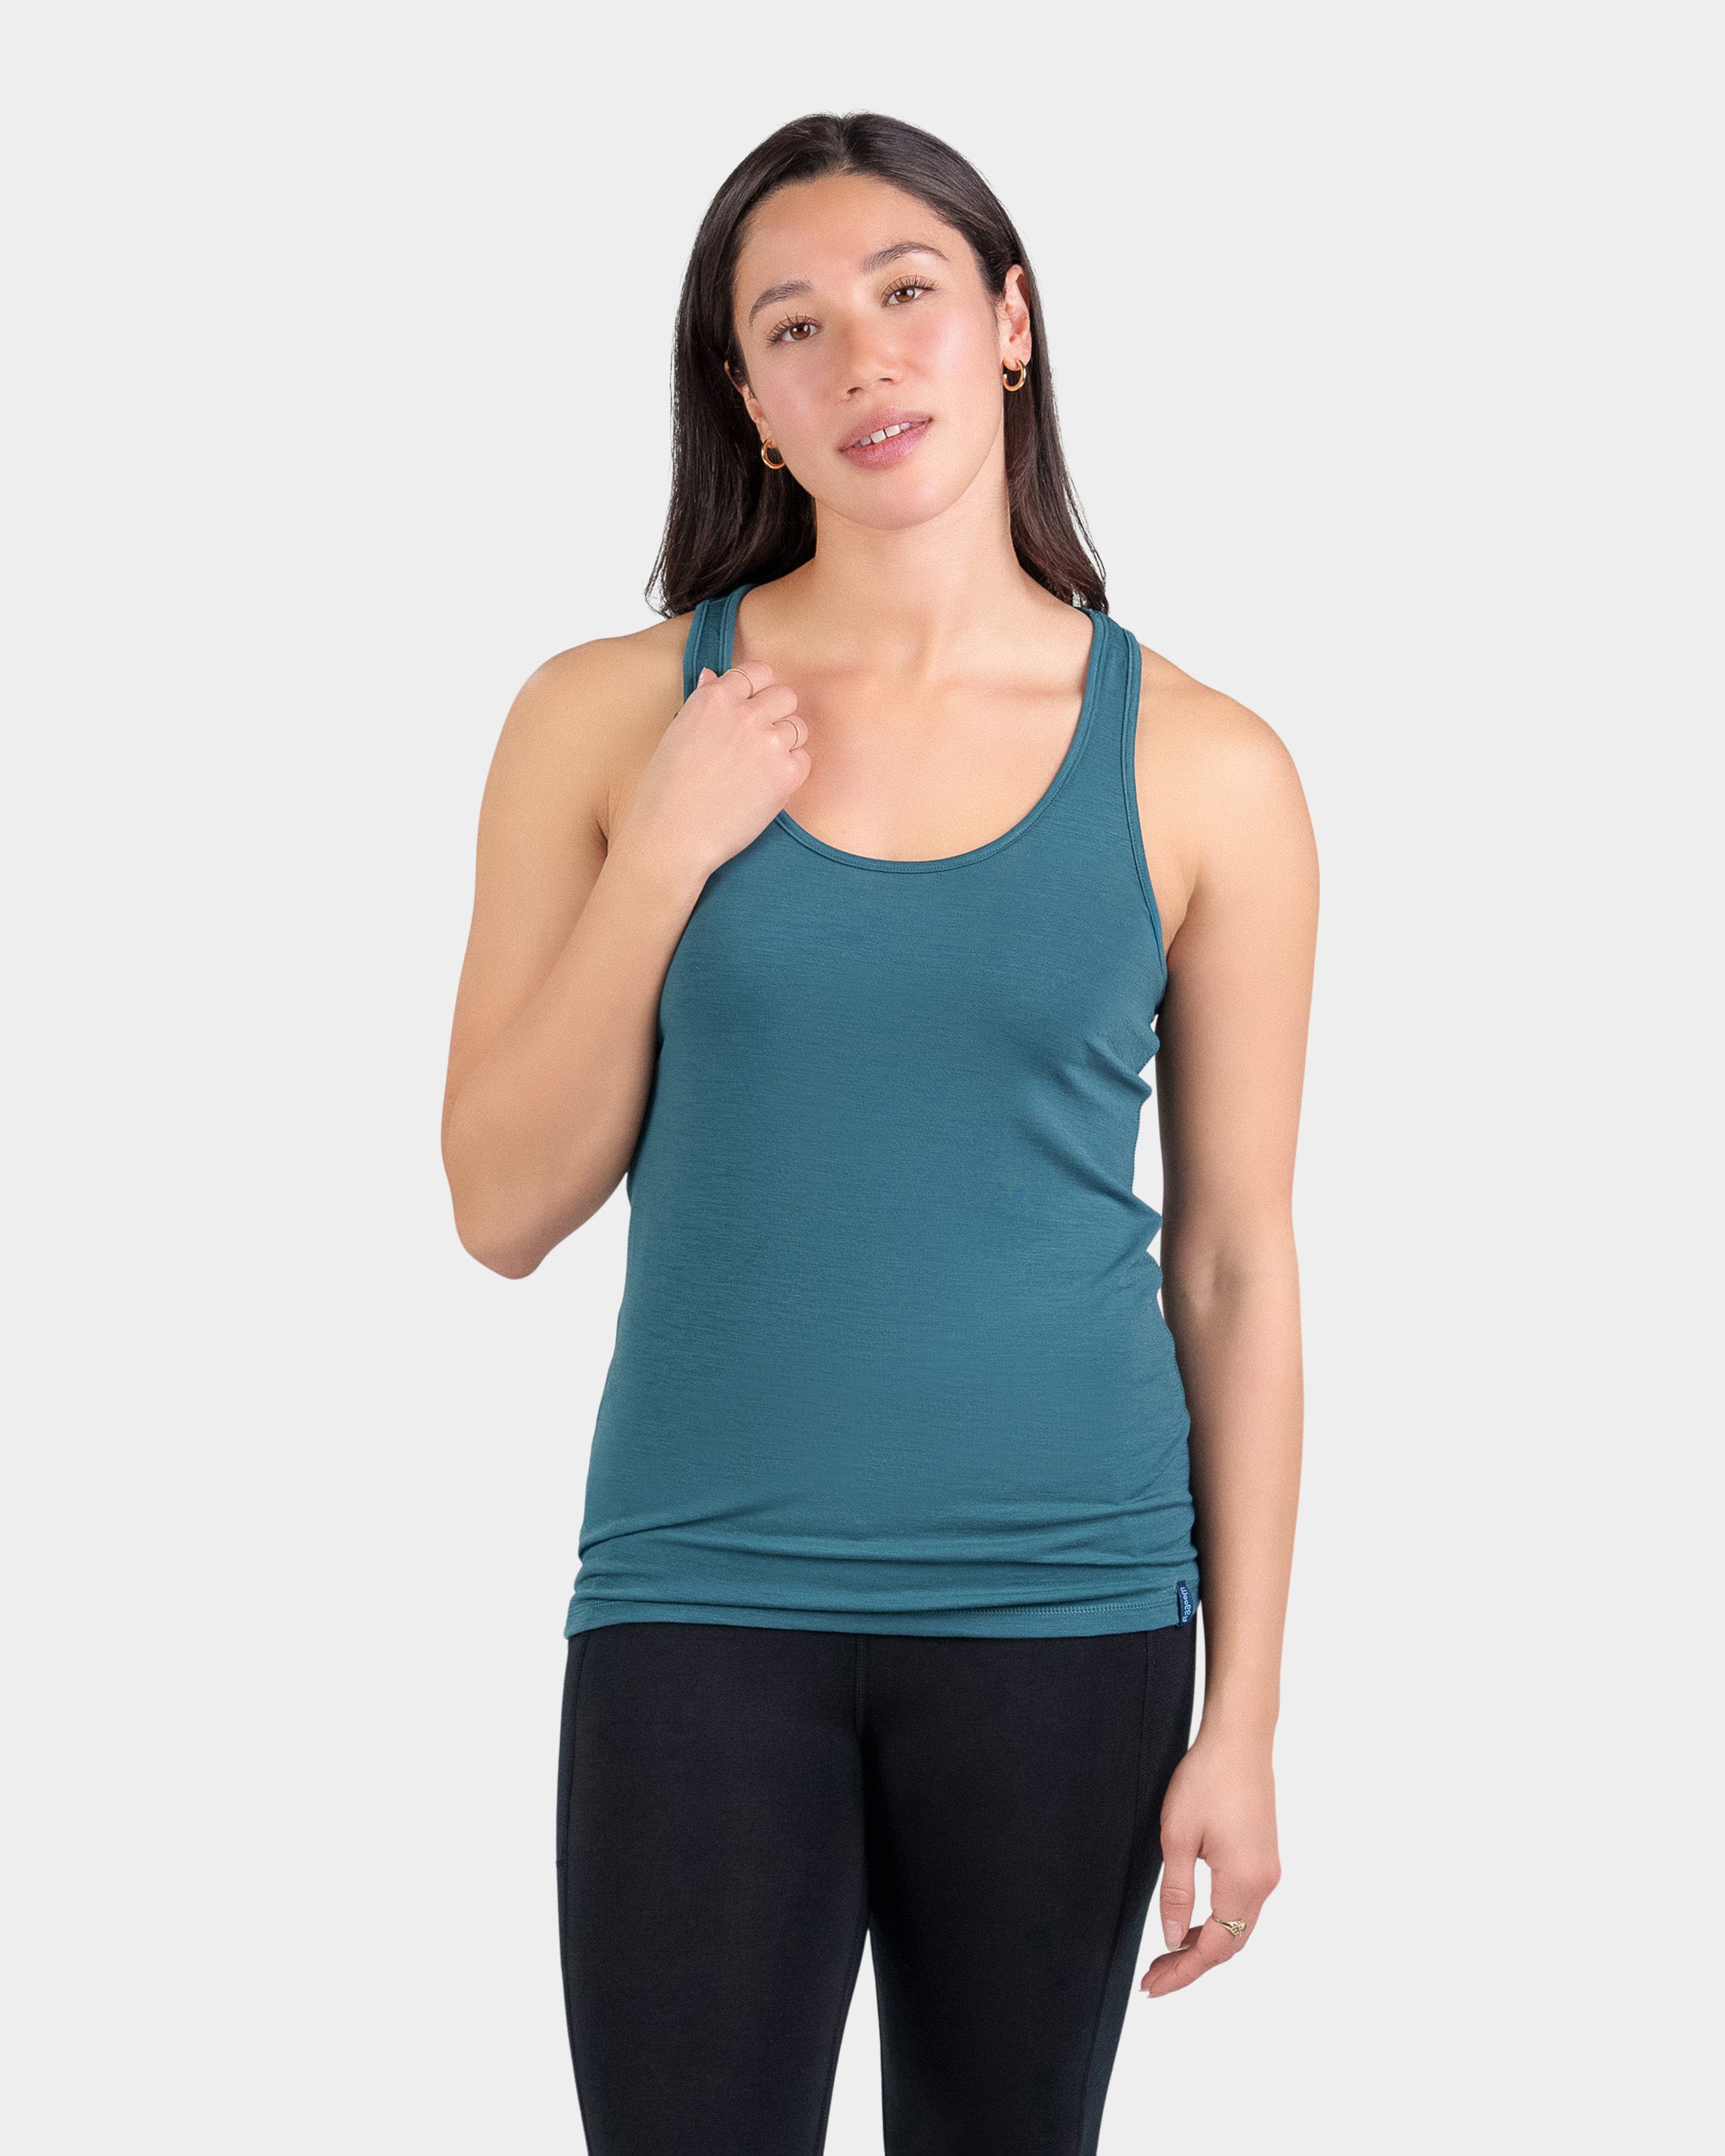 Workout Tops For Women Athletic Gym Exercise Clothes High Neck Tank Tops  Open Back Workout Crop Tops Running Shirts For Women Turquoise XL